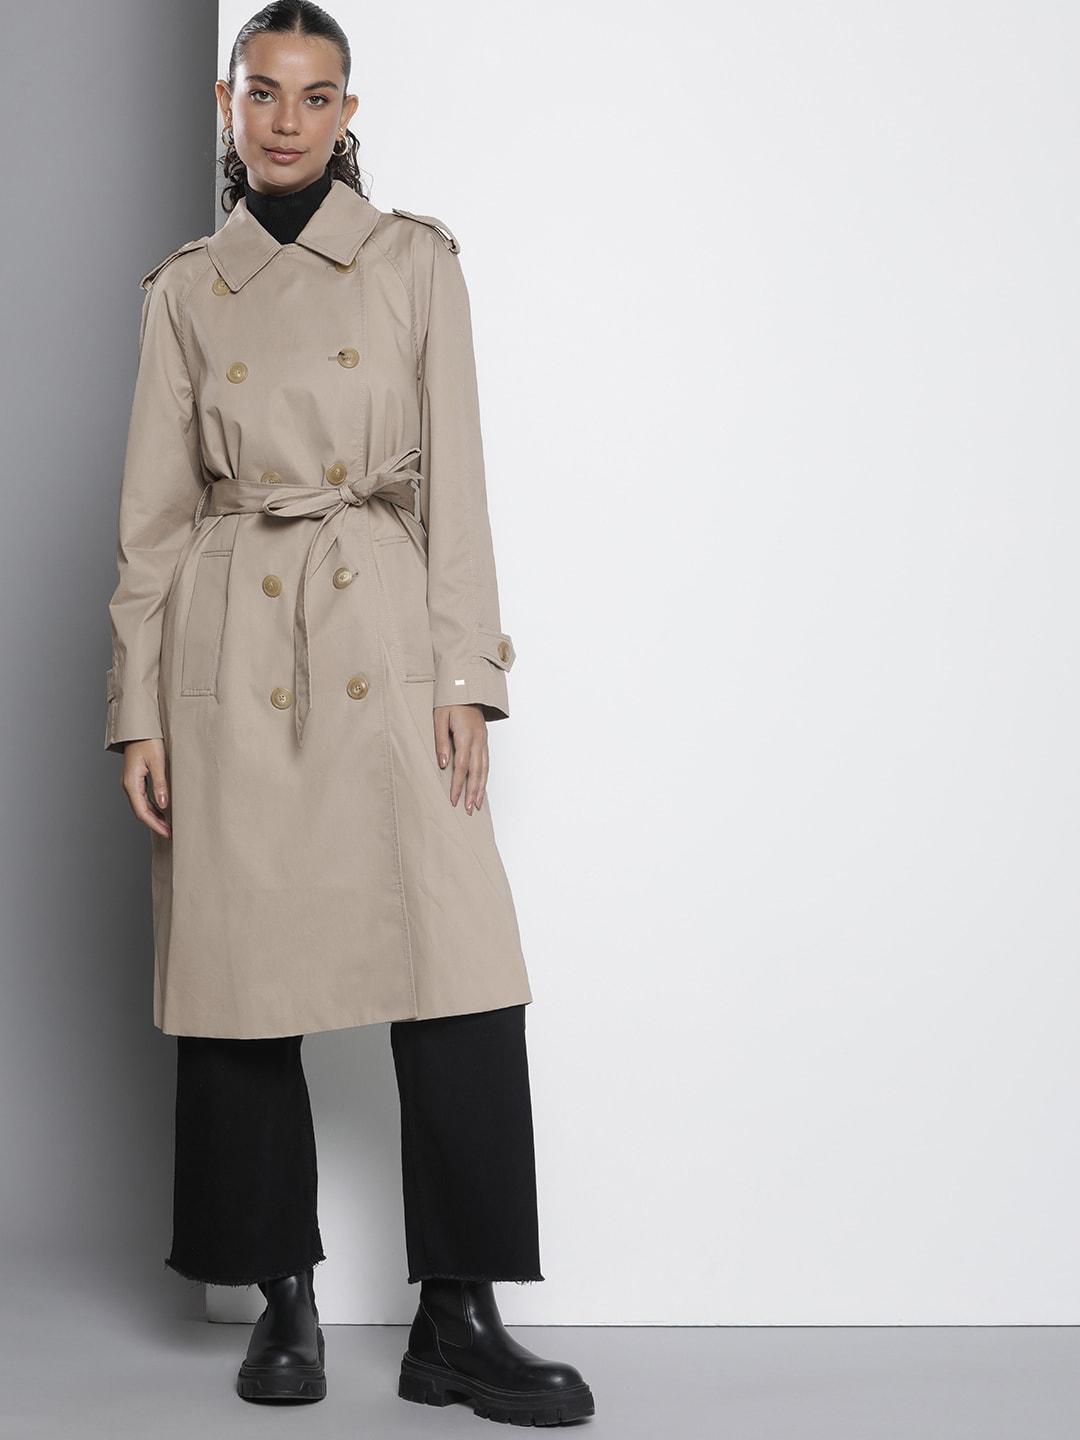 tommy hilfiger solid pure cotton double-breasted trench coat comes with a belt